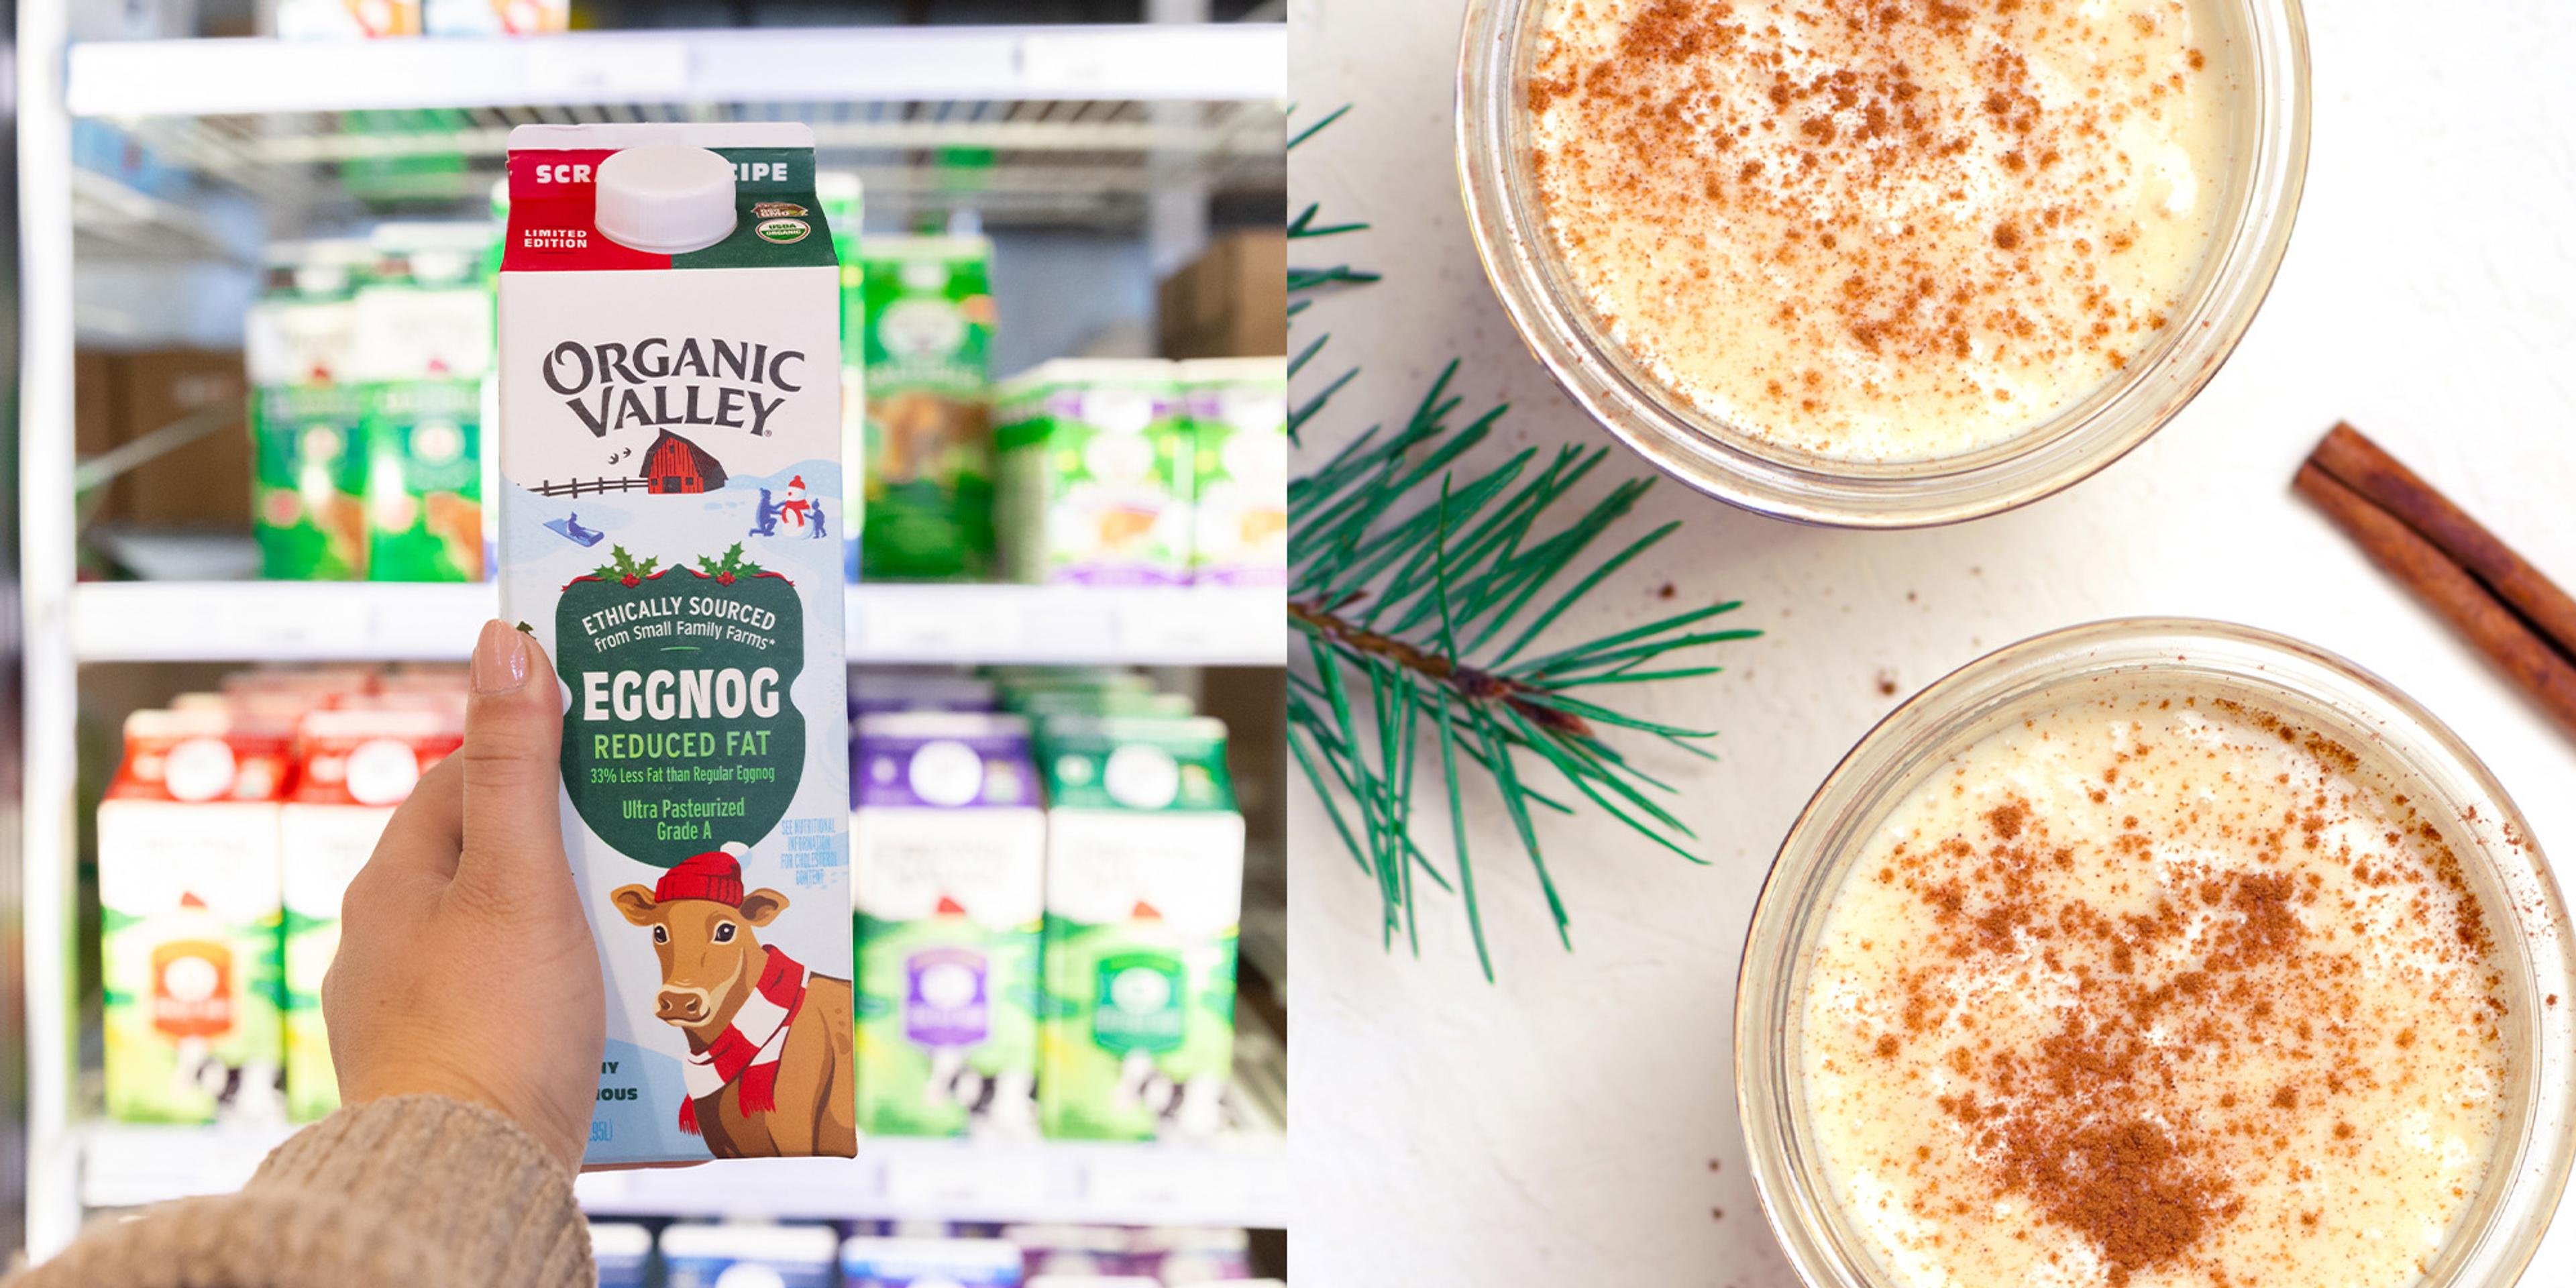 A carton of Organic Valley Eggnog in a shopper's hand along with two glasses of eggnog.